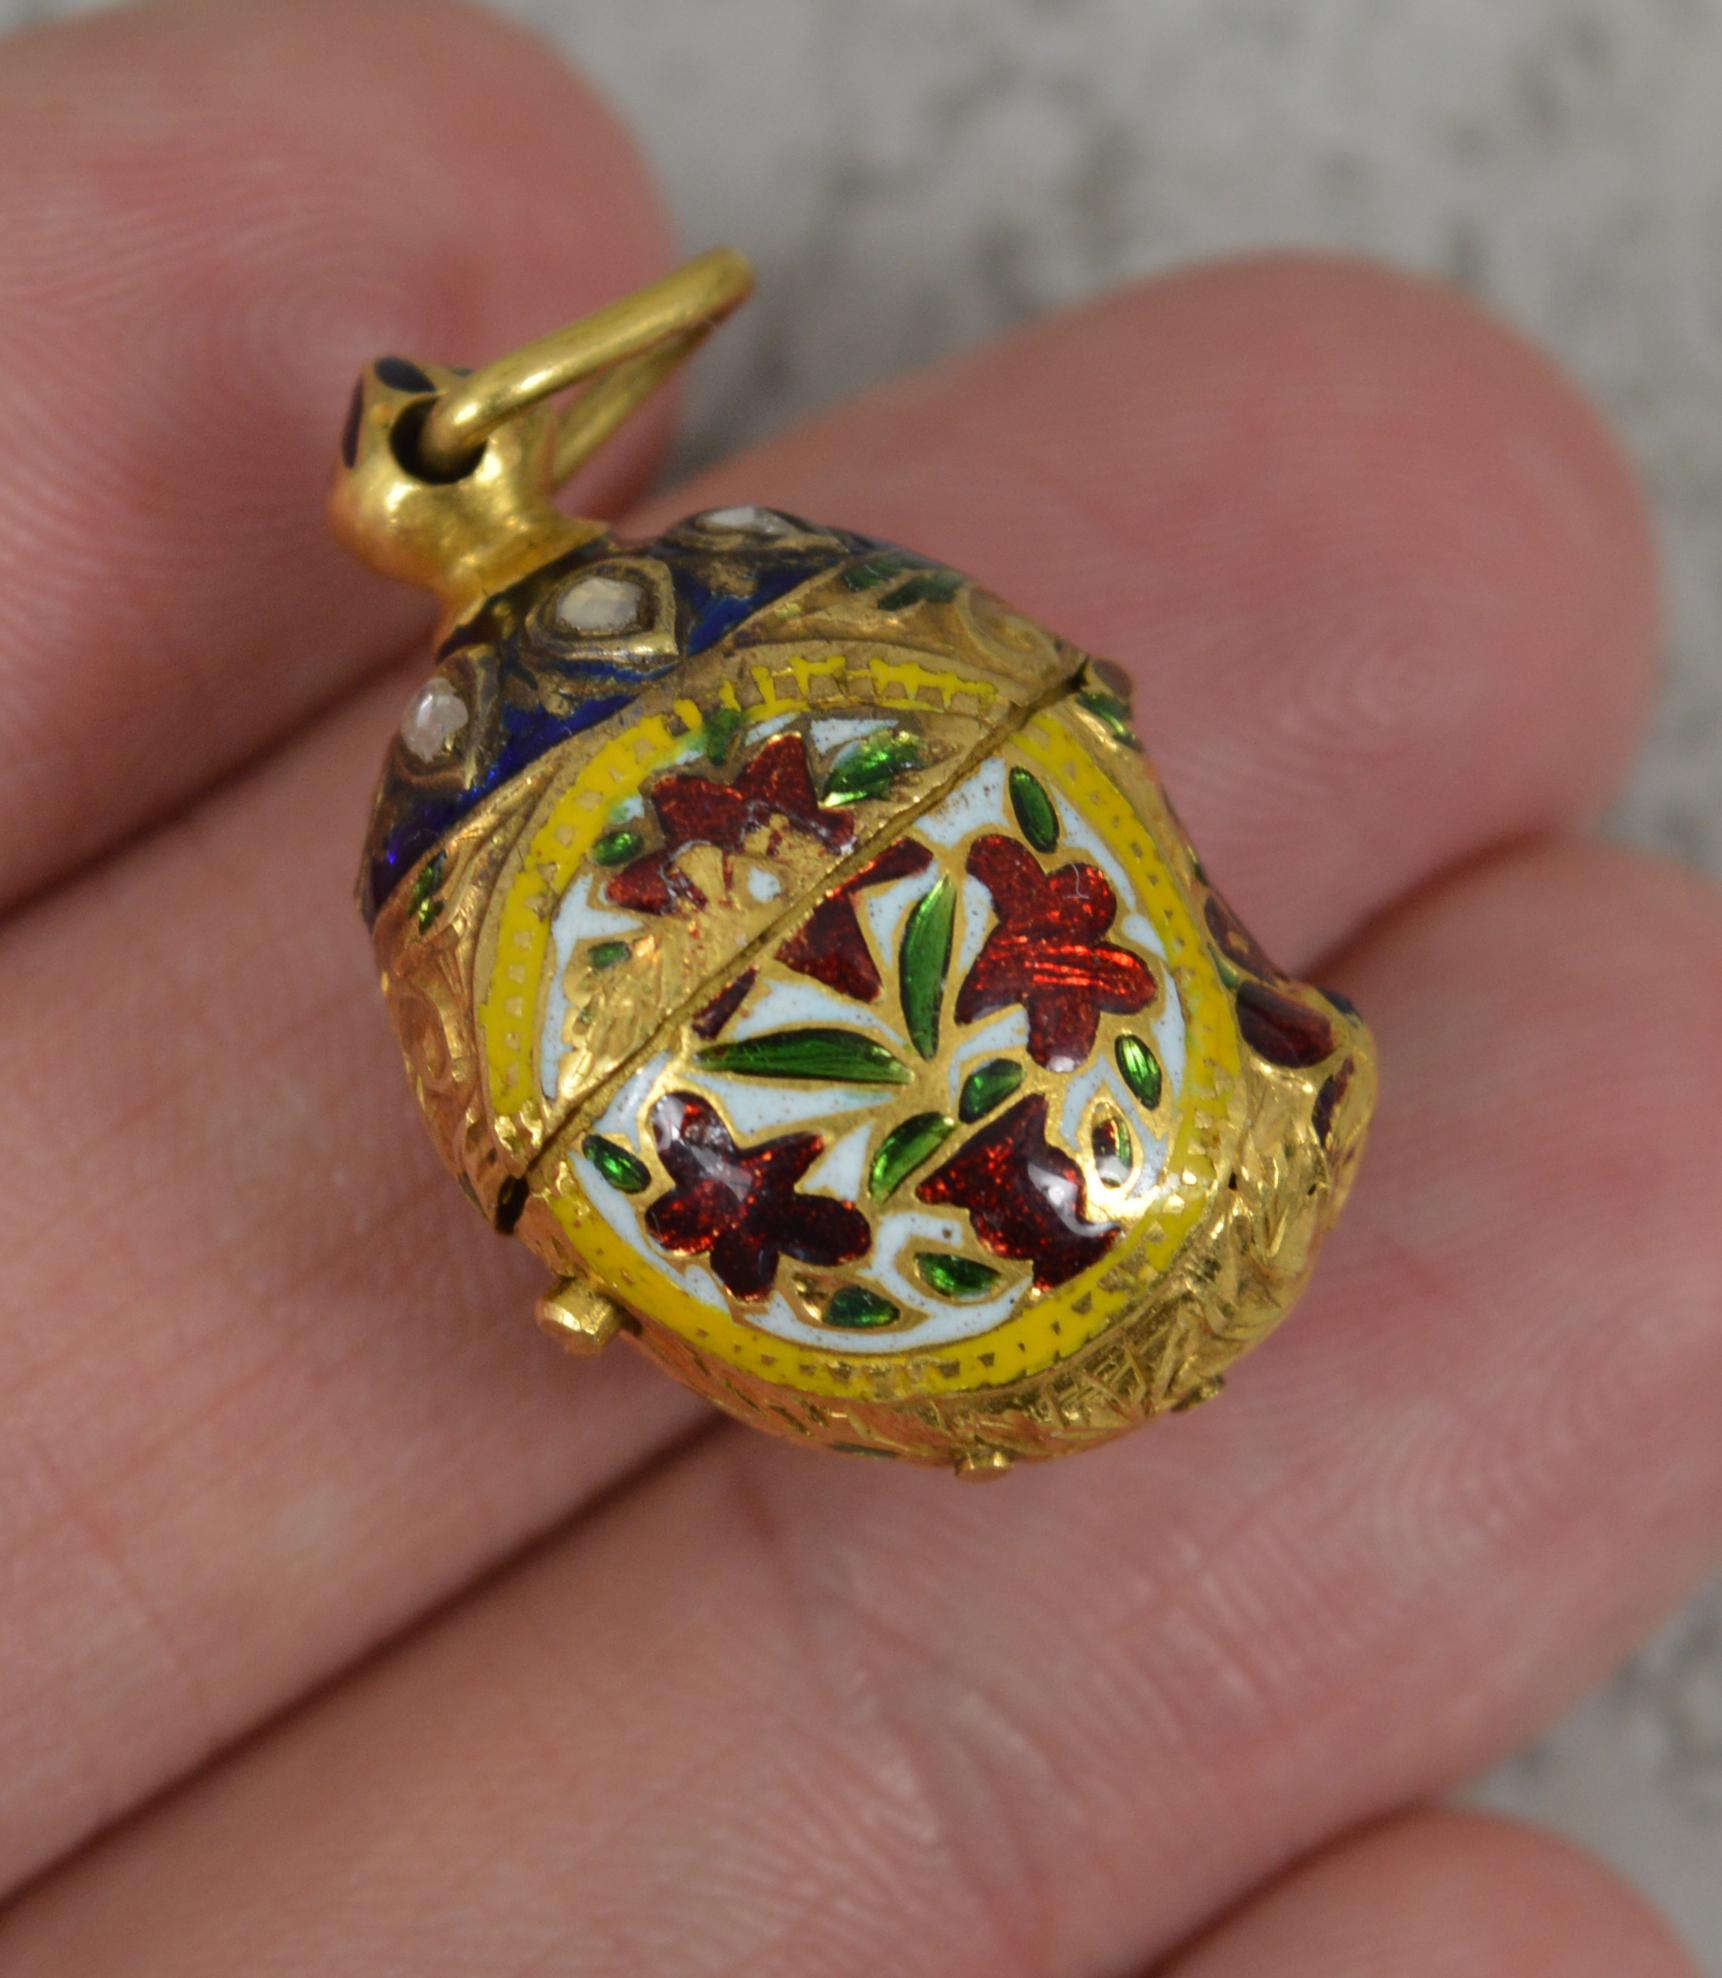 A superb Victorian period pomander box.
Solid 20 carat yellow gold example with red, green, blue and white enamel and set with rose cut diamonds to the lid.
Hand made example with hinge opening.

CONDITION ; Very good. Crisp design. Issue free.